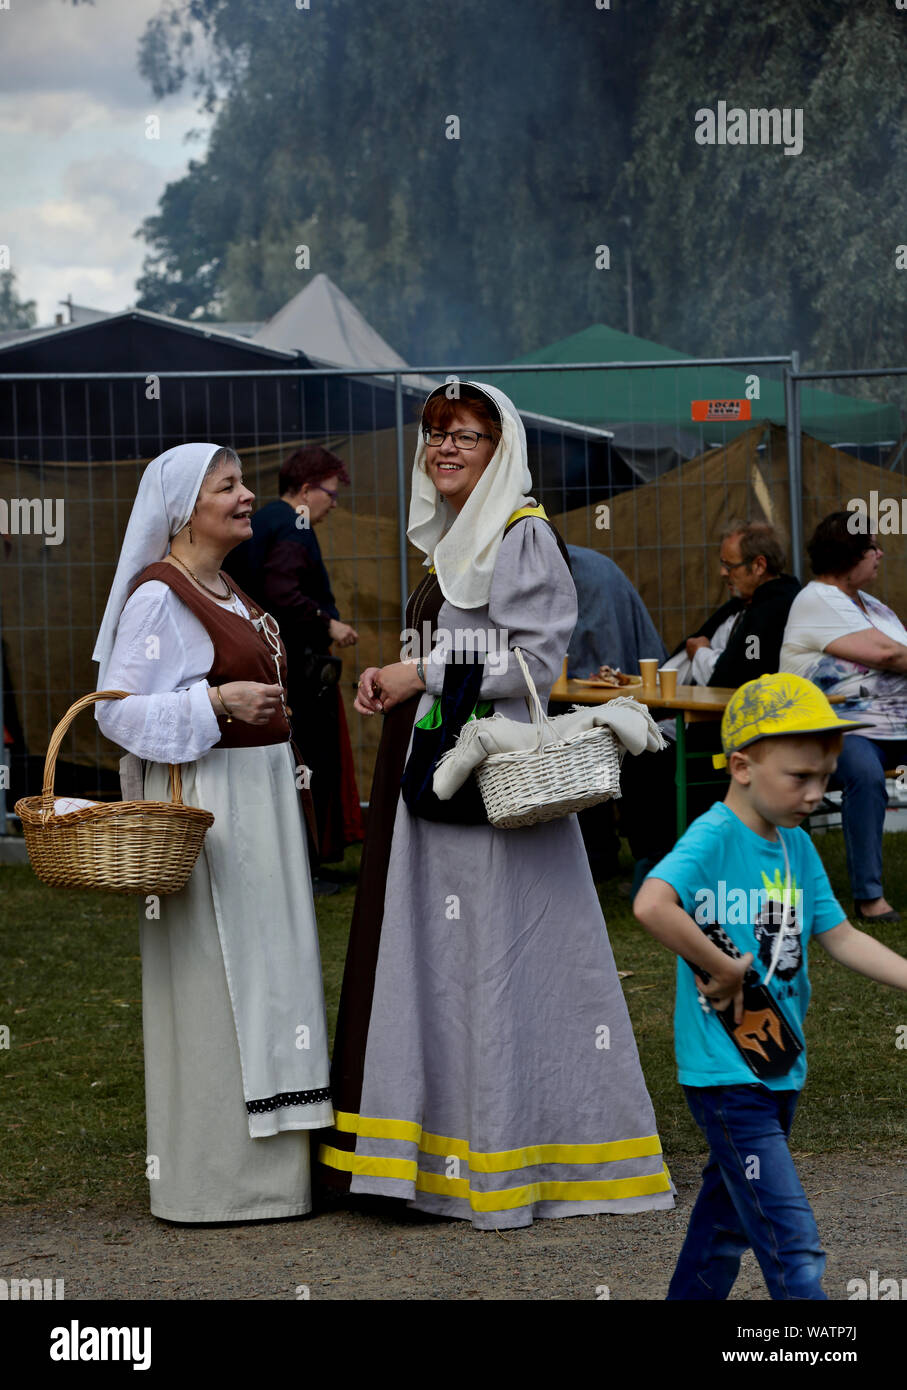 Hameenlinna Finland 08/17/2019 Medieval festival with craftsman, knights and entertainers. Ladies with elegant dresses having conversation in festival Stock Photo